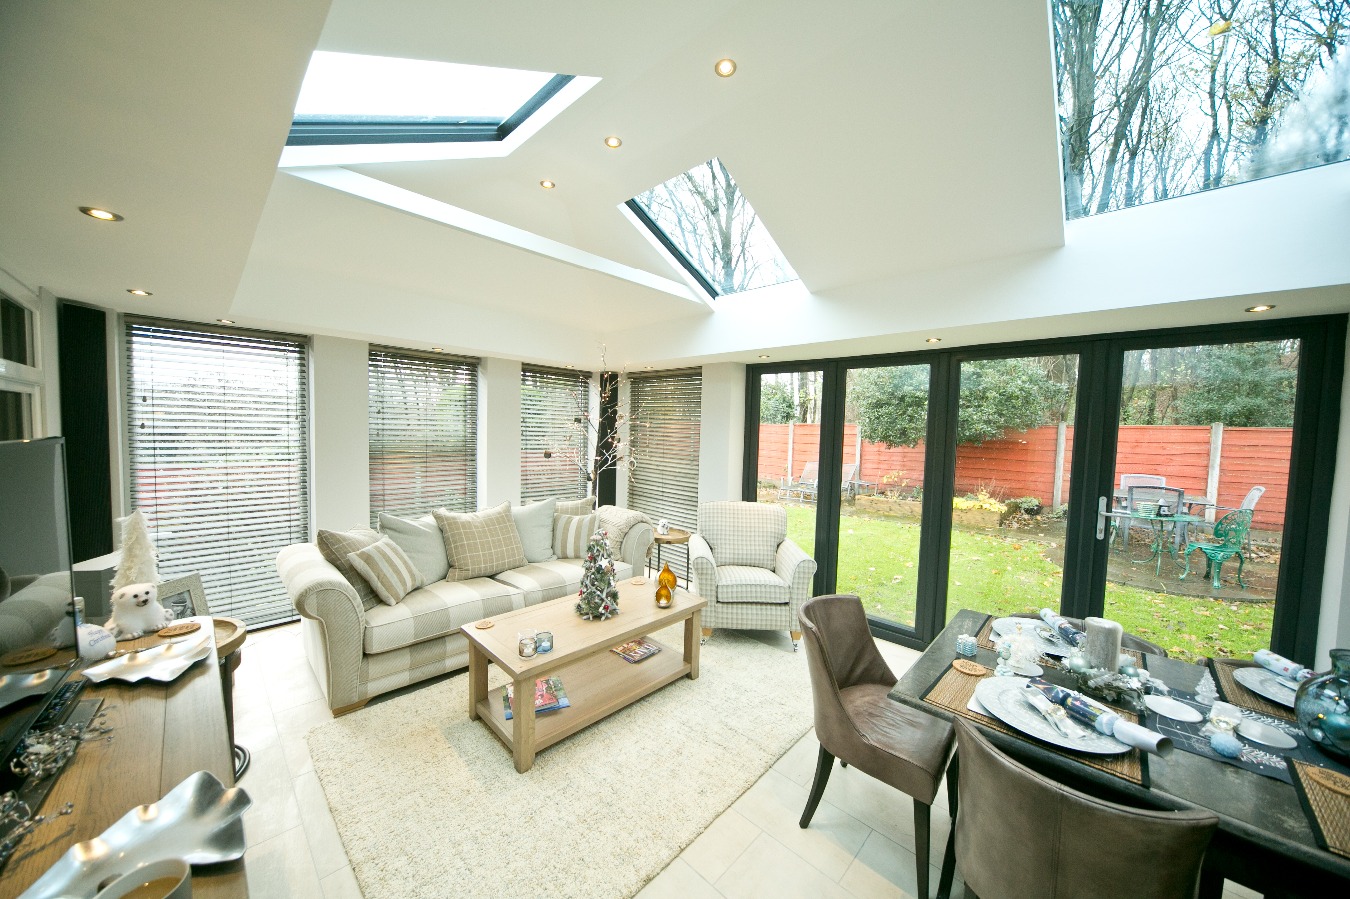 House Extension, Orangery or Conservatory — What’s Right for You?